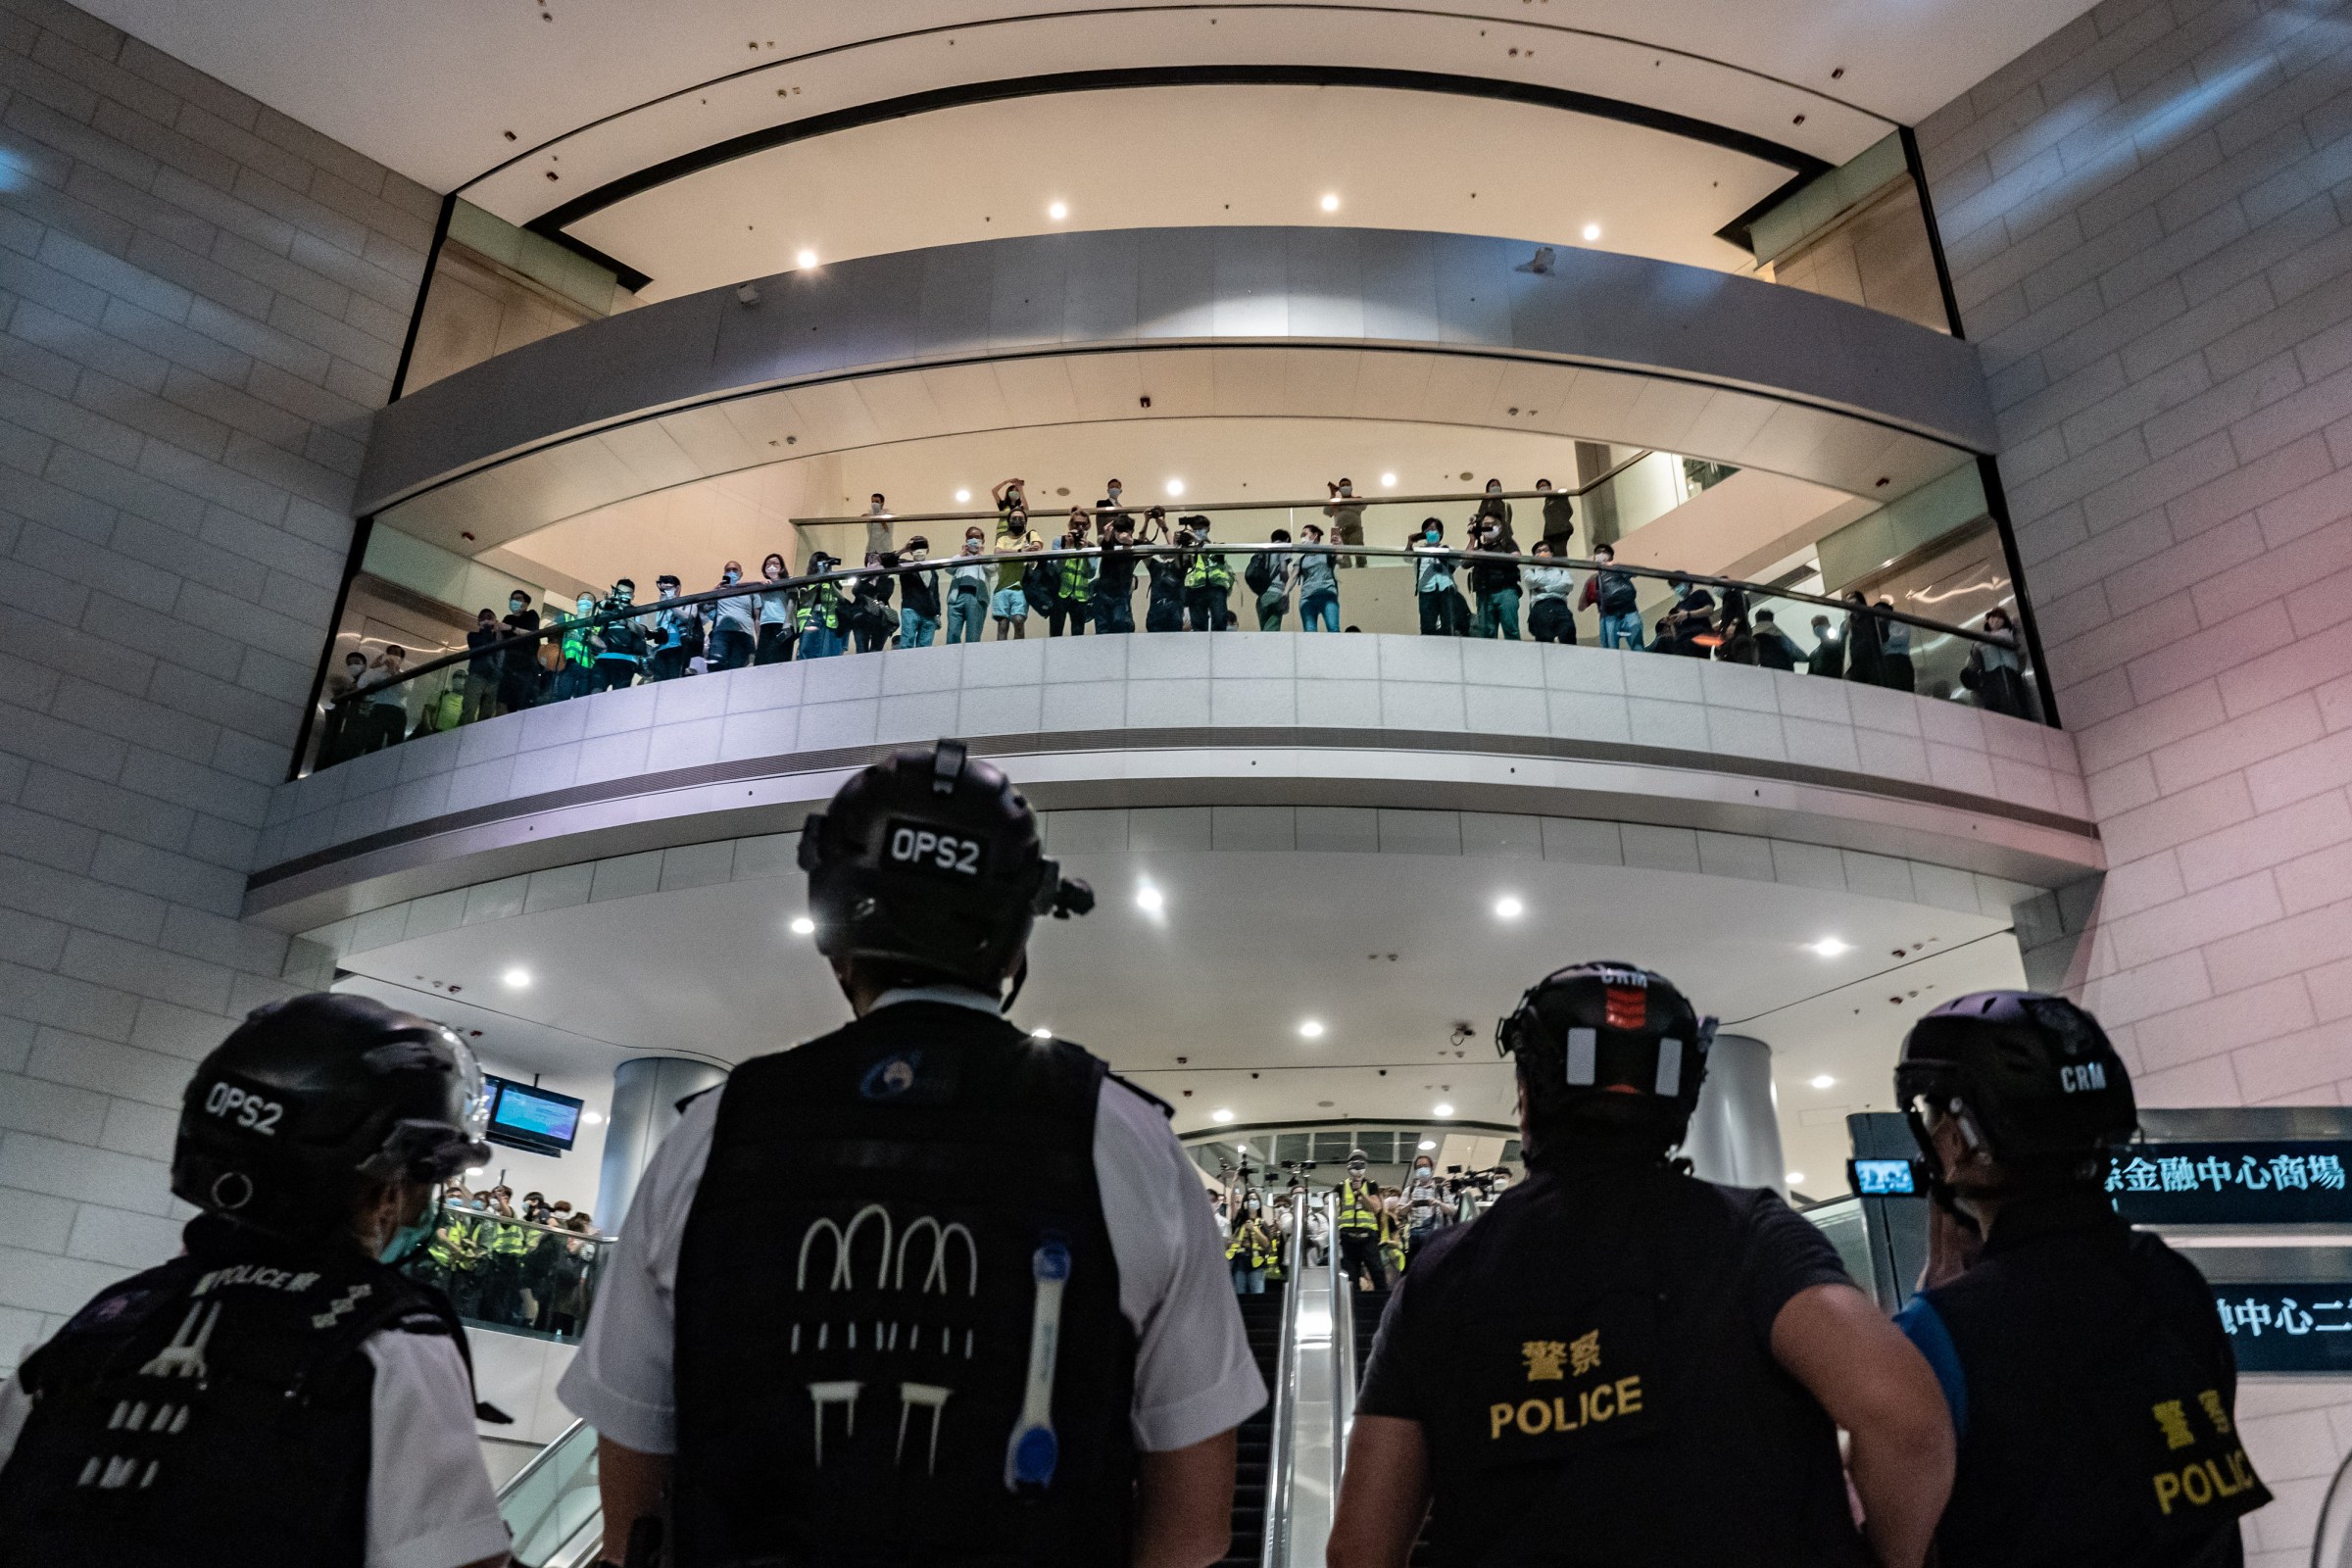 Police stand off with protesters at the International Finance Center shopping mall on April 28, 2020, in Hong Kong.